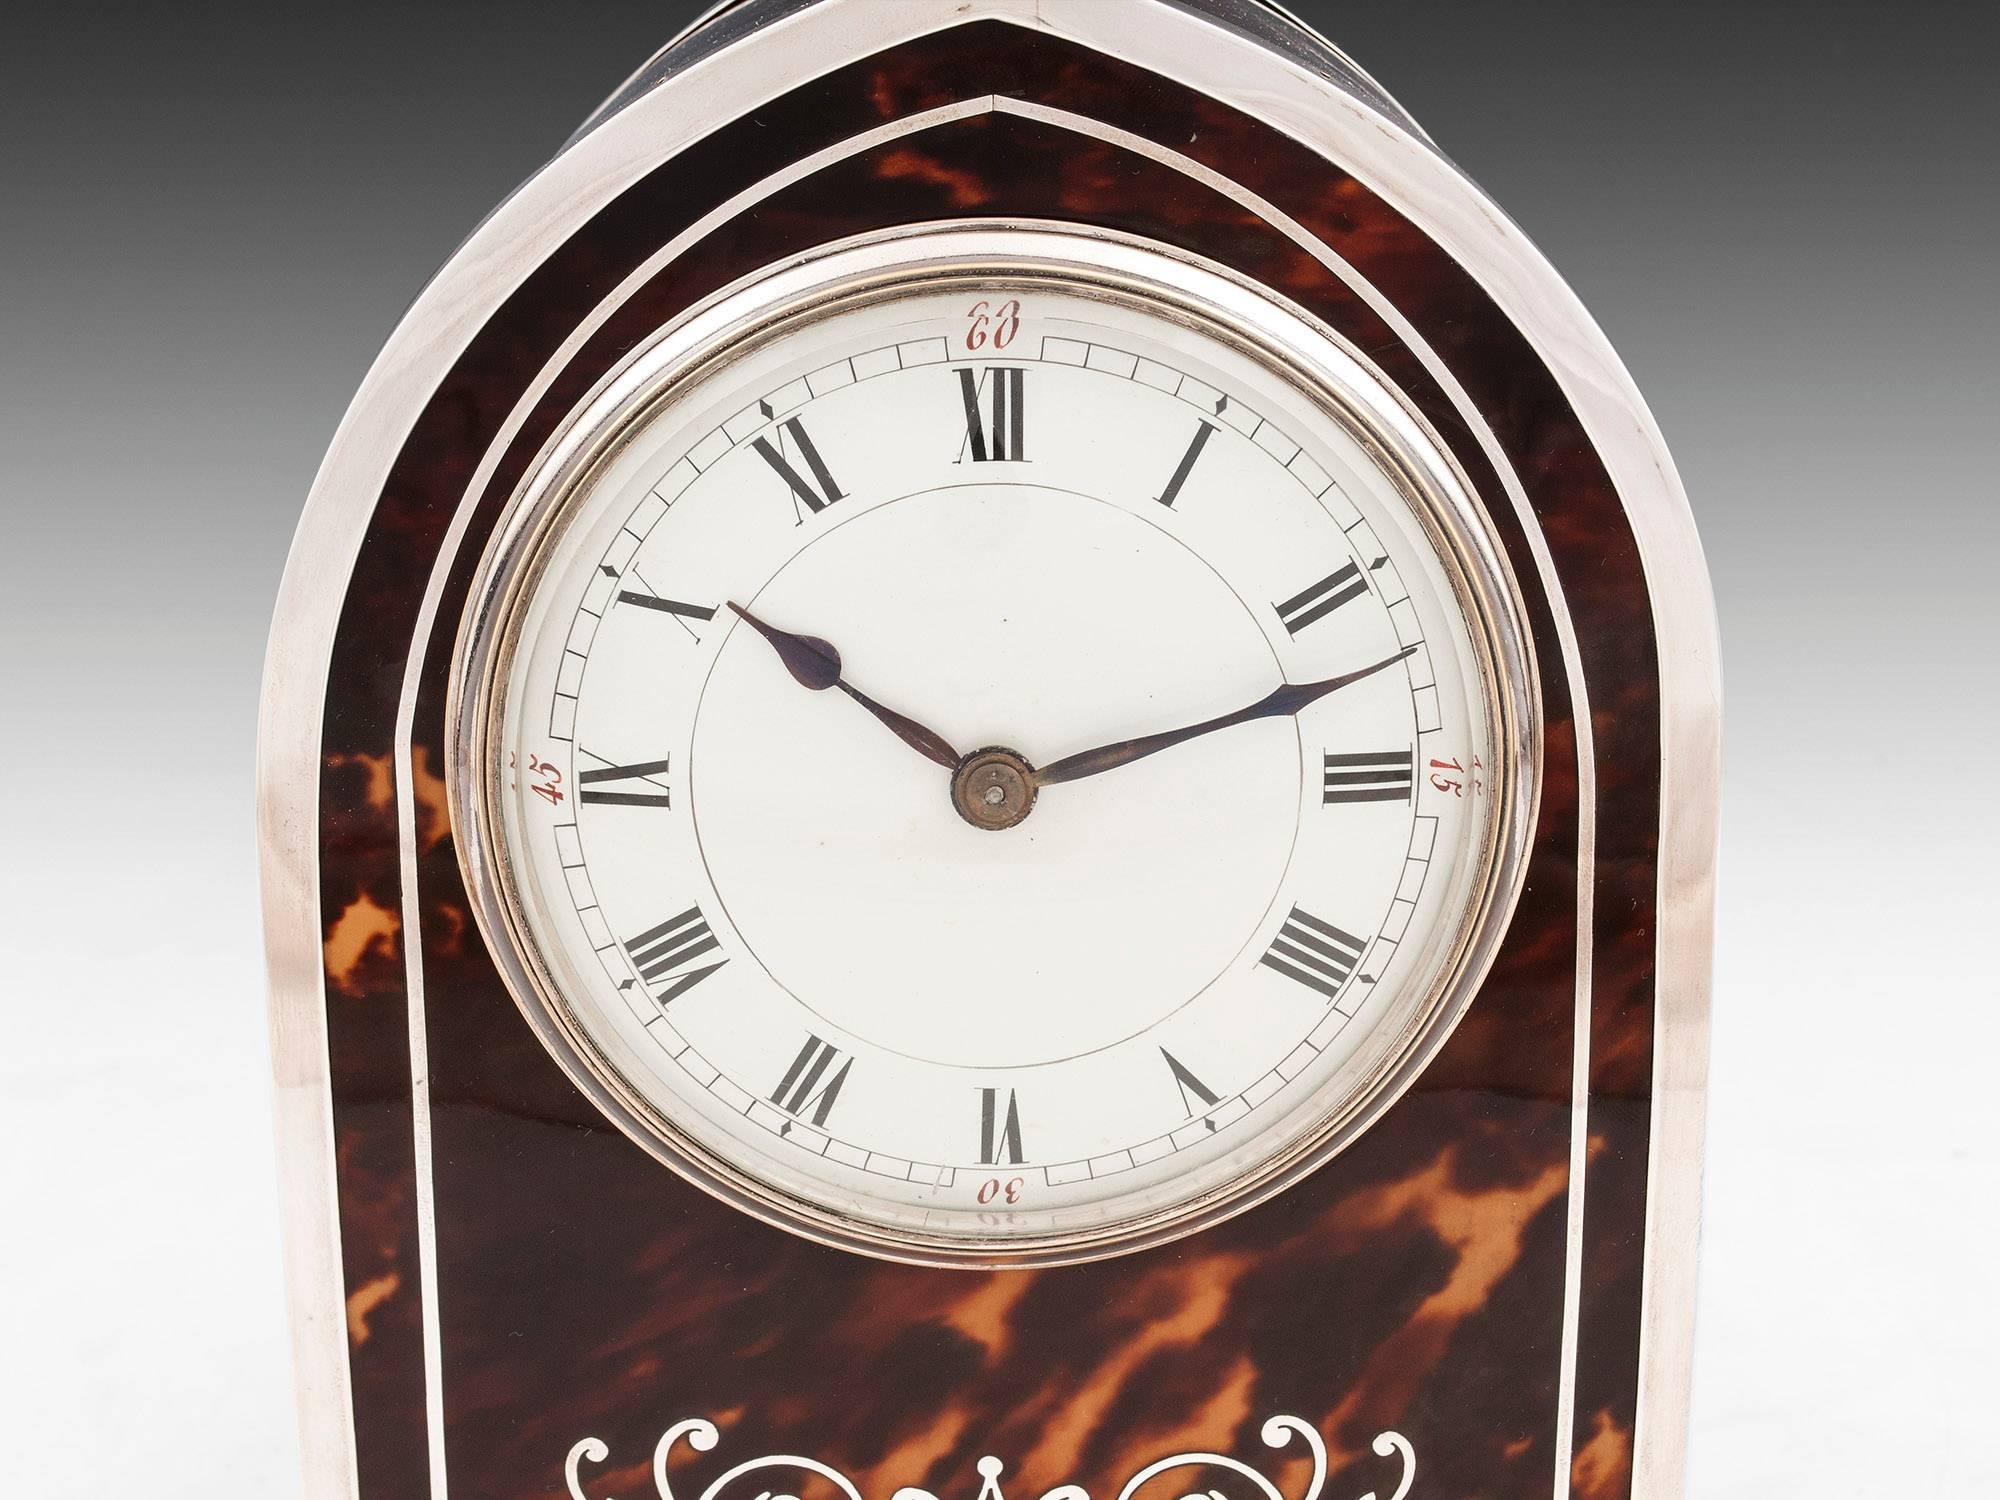 Edwardian Tortoiseshell and Silver Mantle Clock In Excellent Condition For Sale In Northampton, United Kingdom